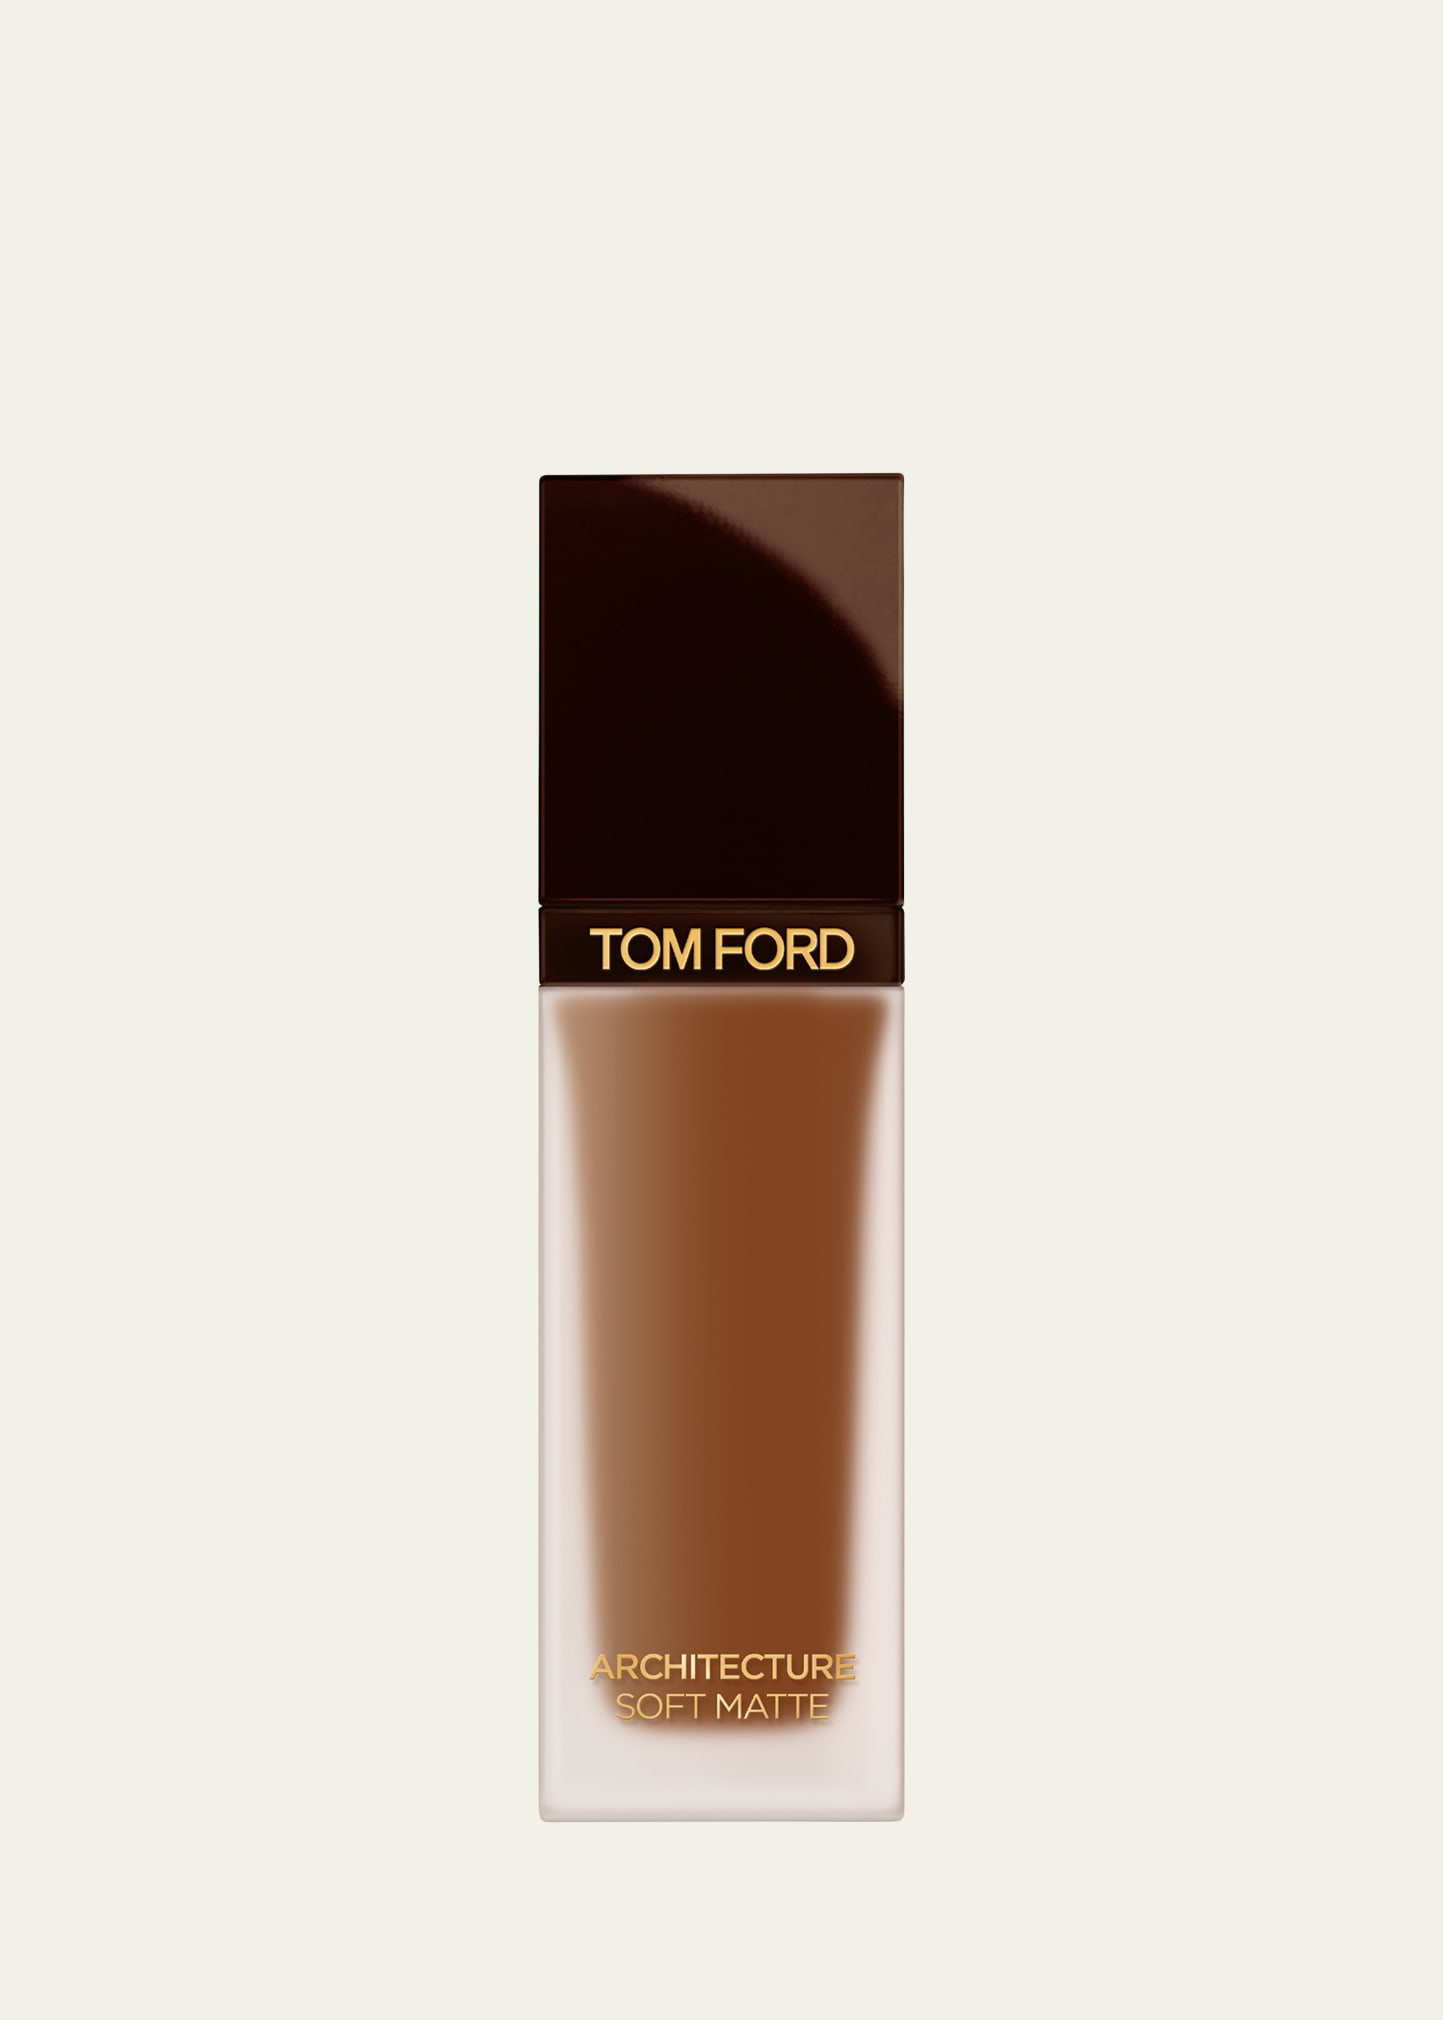 Tom Ford Architecture Soft Matte Foundation In Asm - 11.5 Warm N